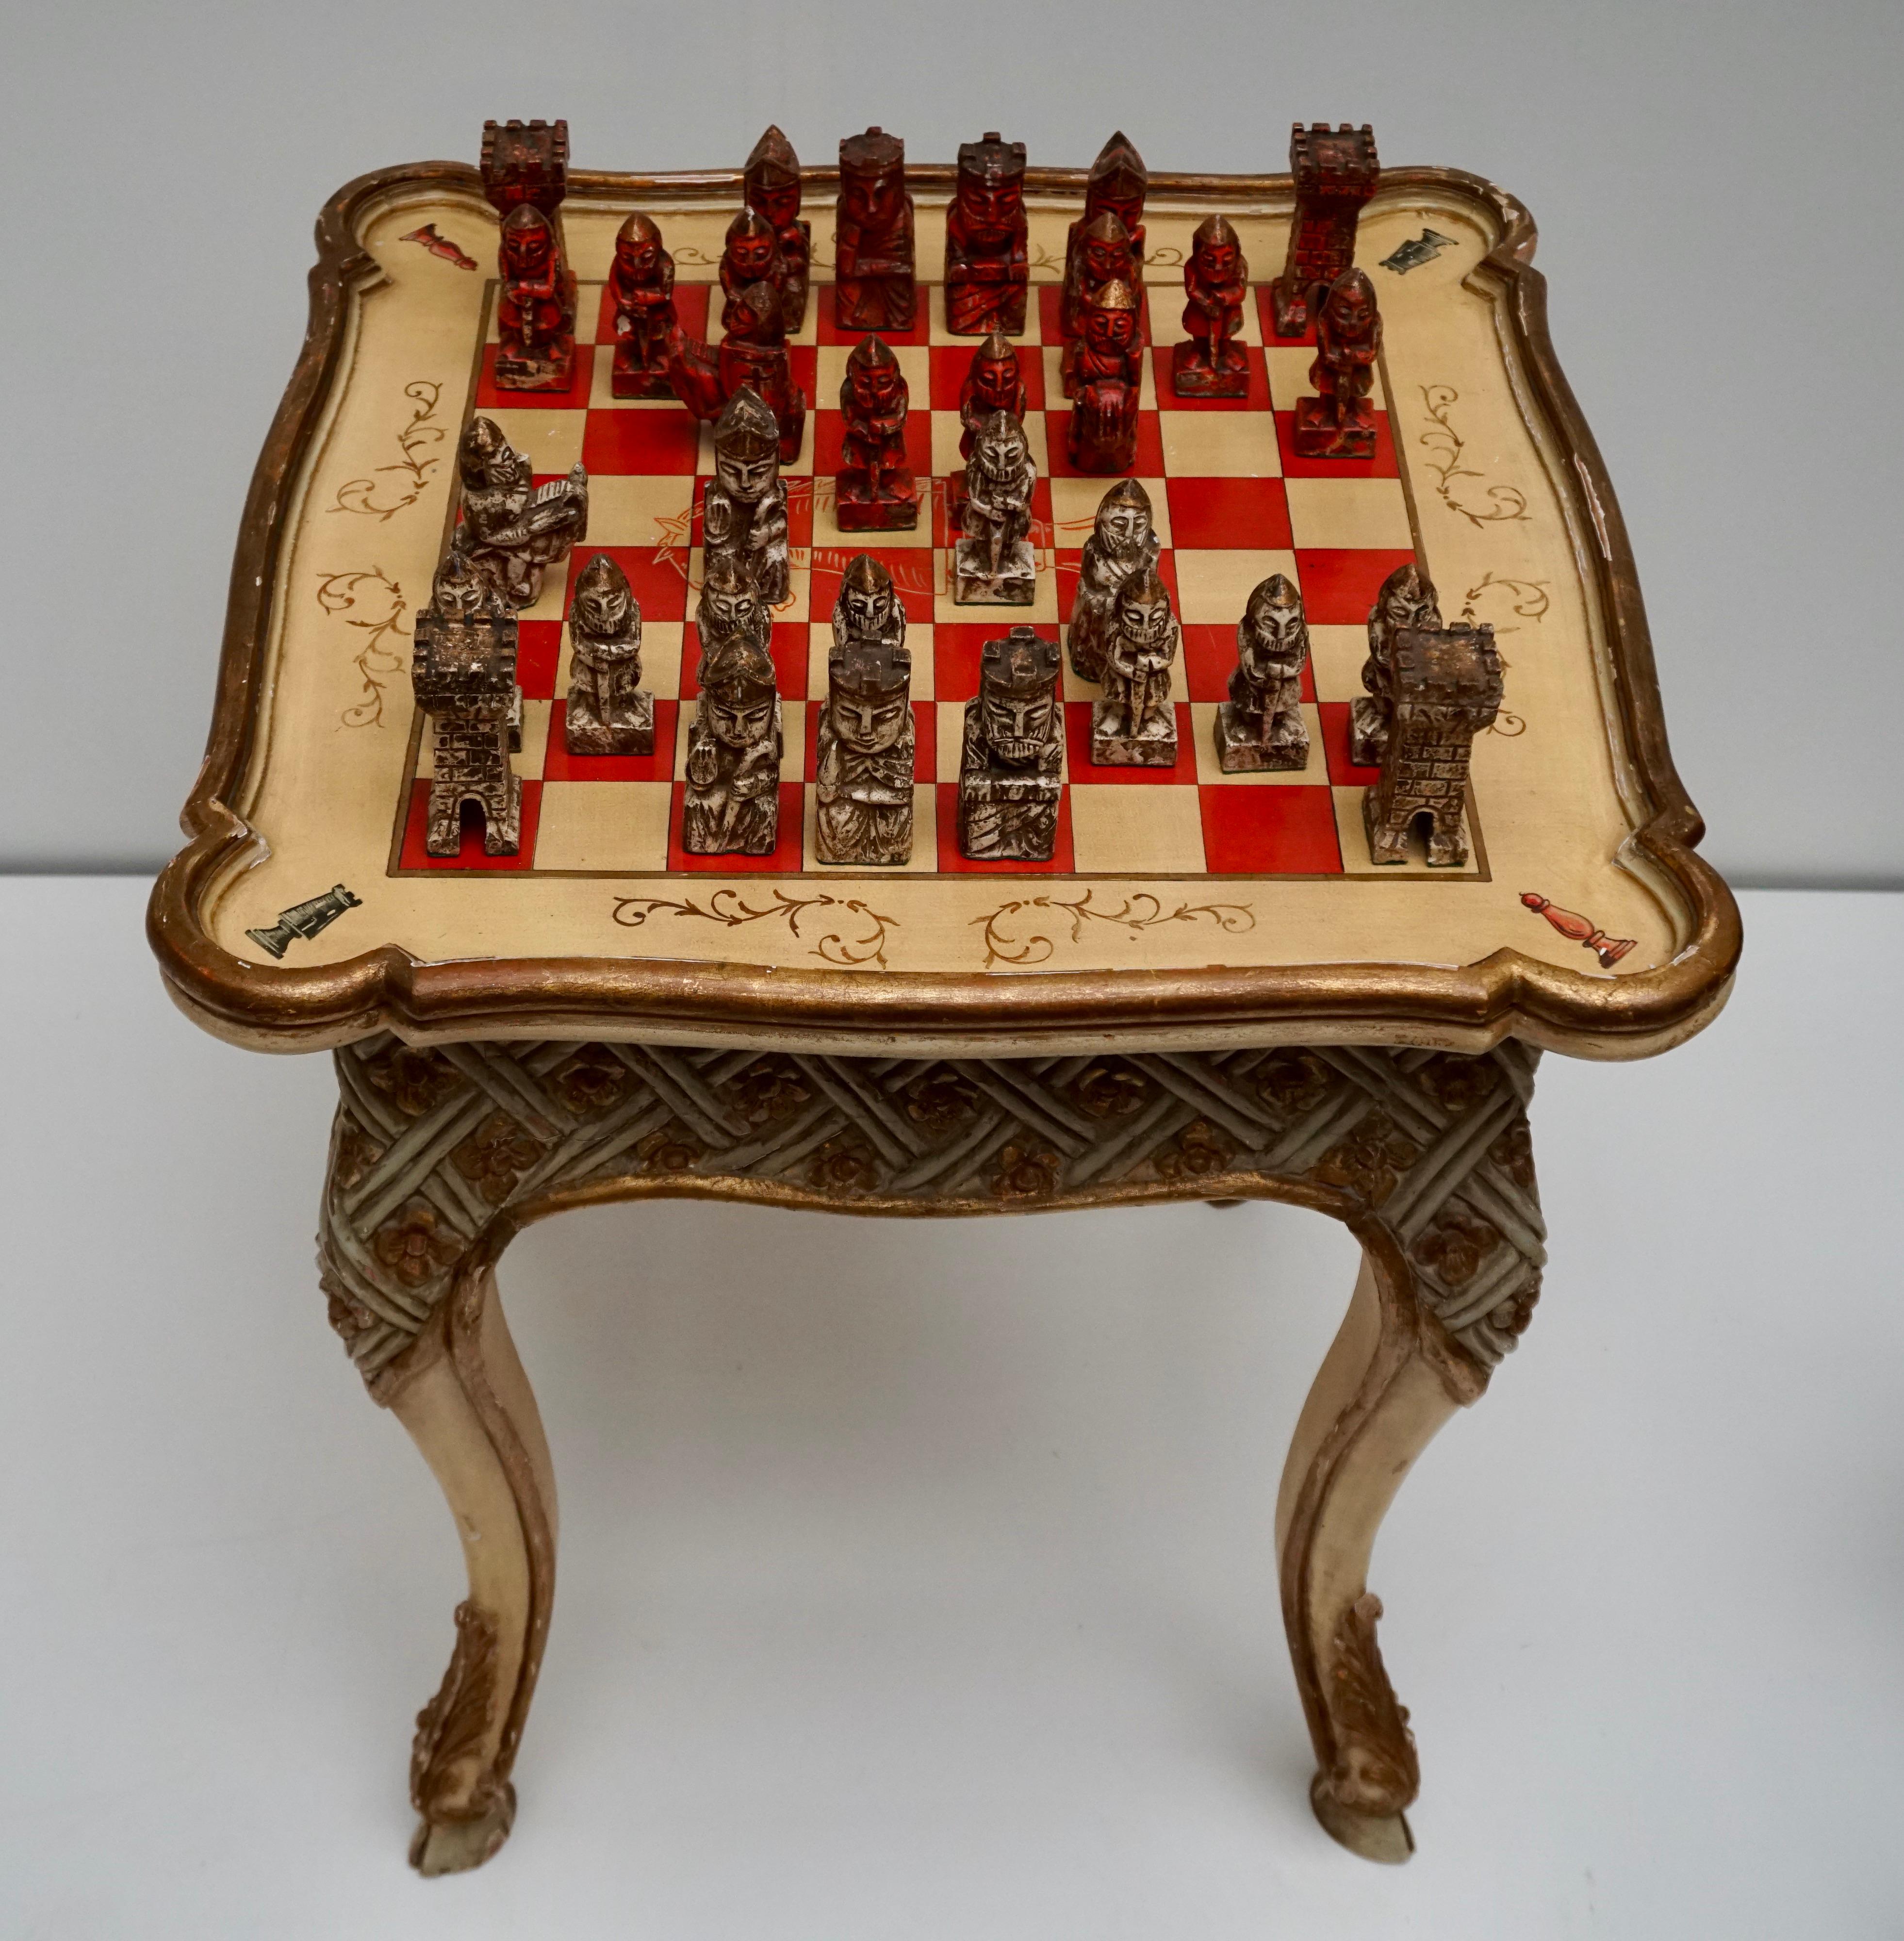 Rare Italian chess table set from early 20th century in carved, lacquered, gilded and hand painted wood with very pleasant floral decorations. 

Measures: Height 79 cm.
Width 69 cm.
 